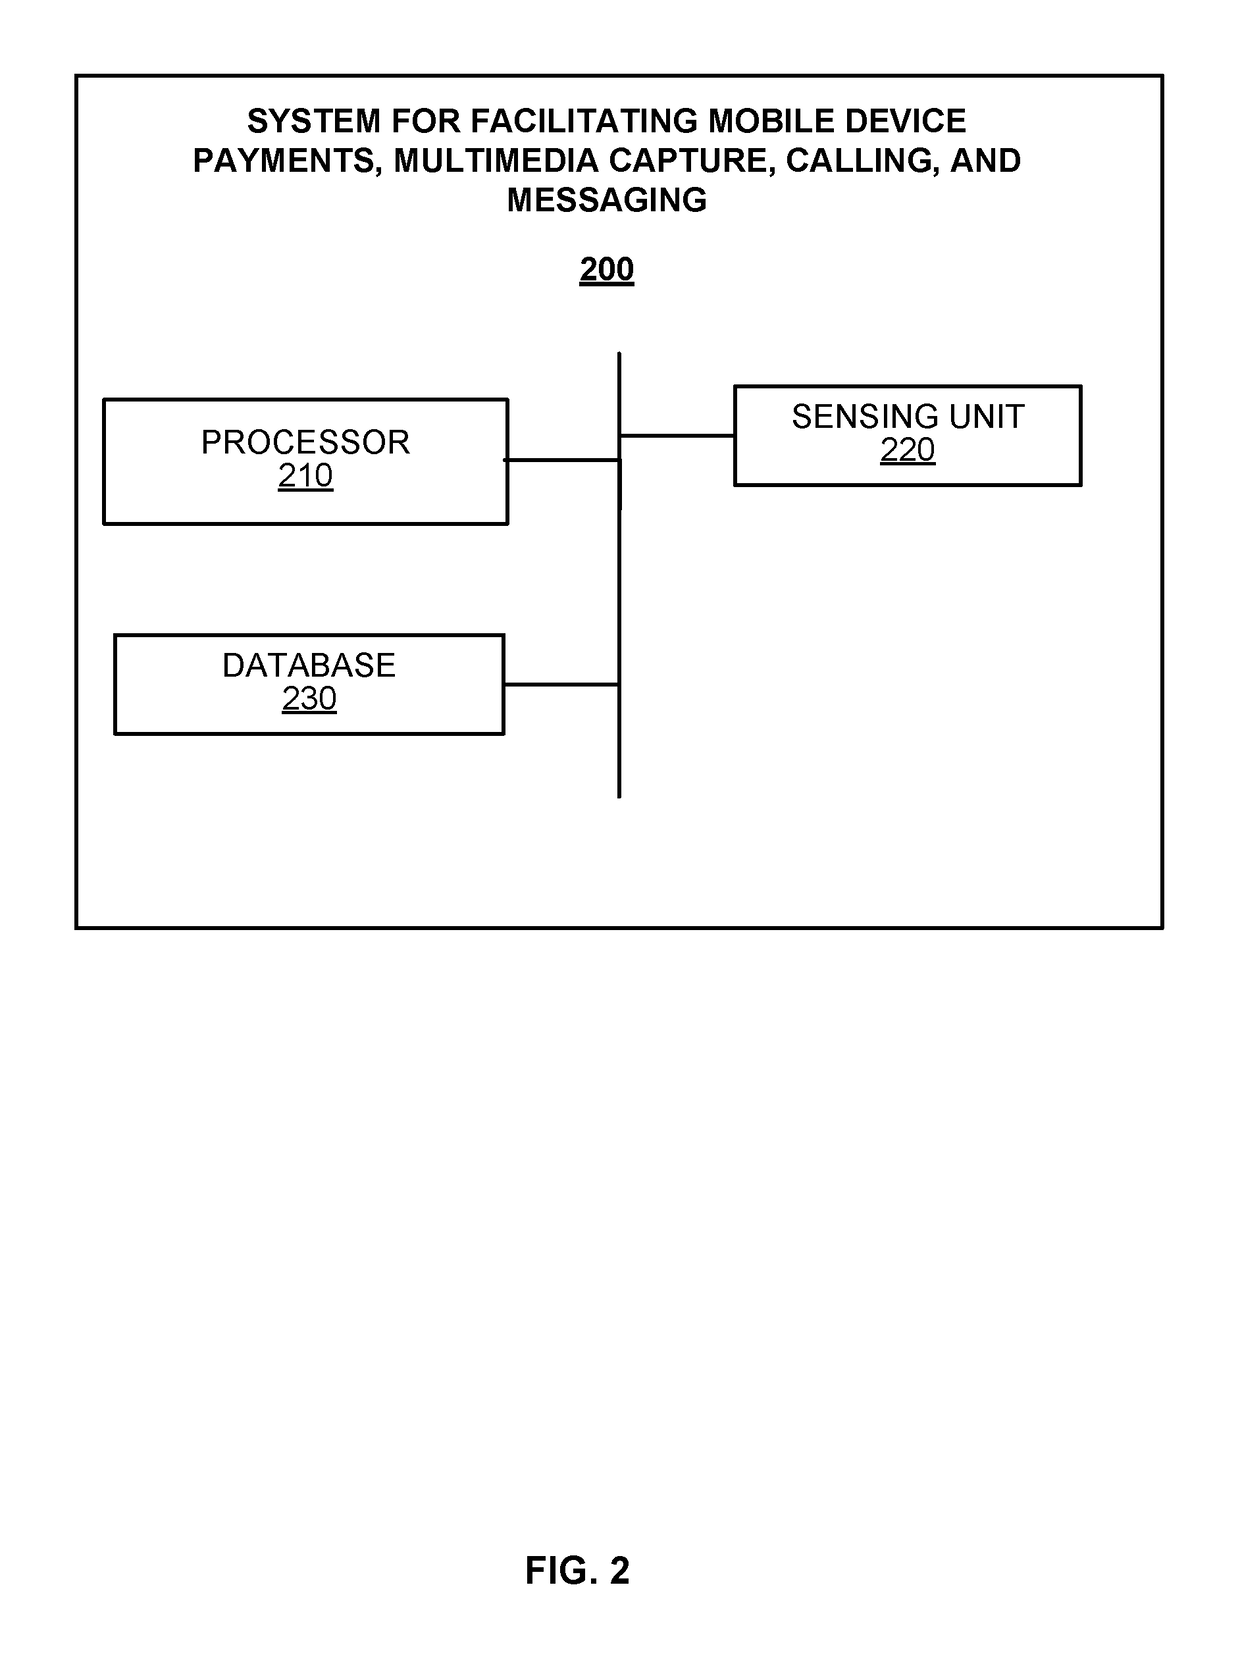 Systems and methods for mobile application, wearable application, transactional messaging, calling, digital multimedia capture, payment transactions, and one touch payment, one tap payment, and one touch service